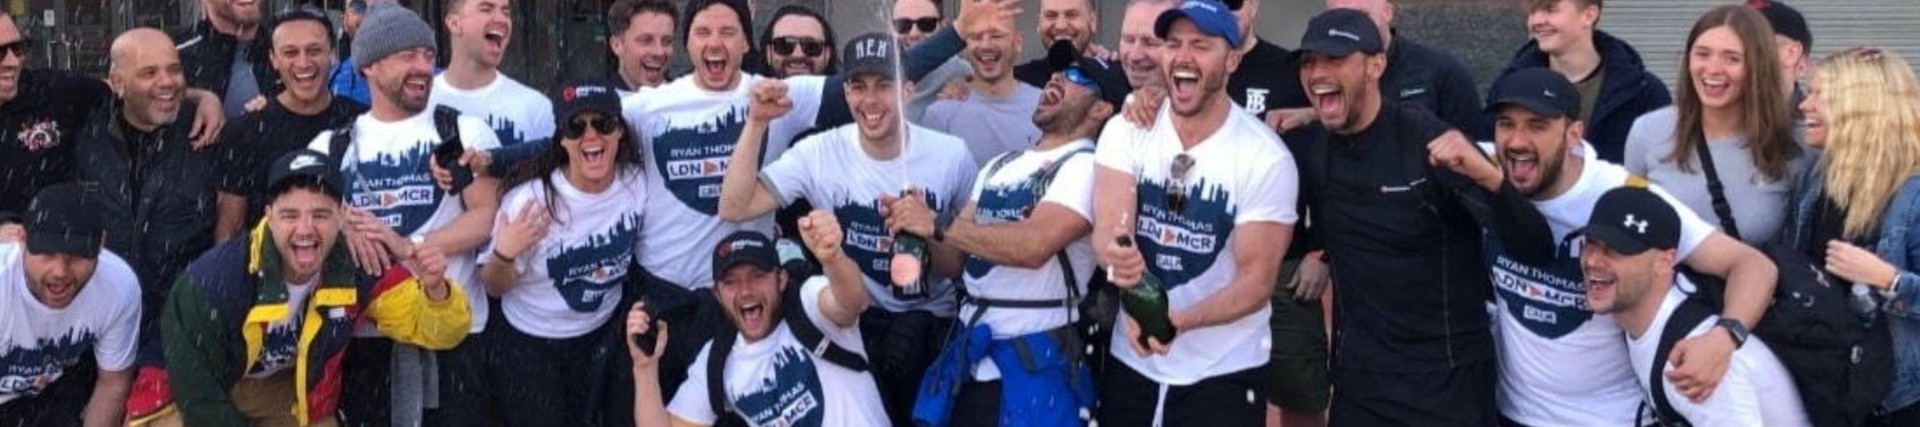 Ryan Thomas finishes epic Morson-backed London to Manchester charity walk for CALM mental health!